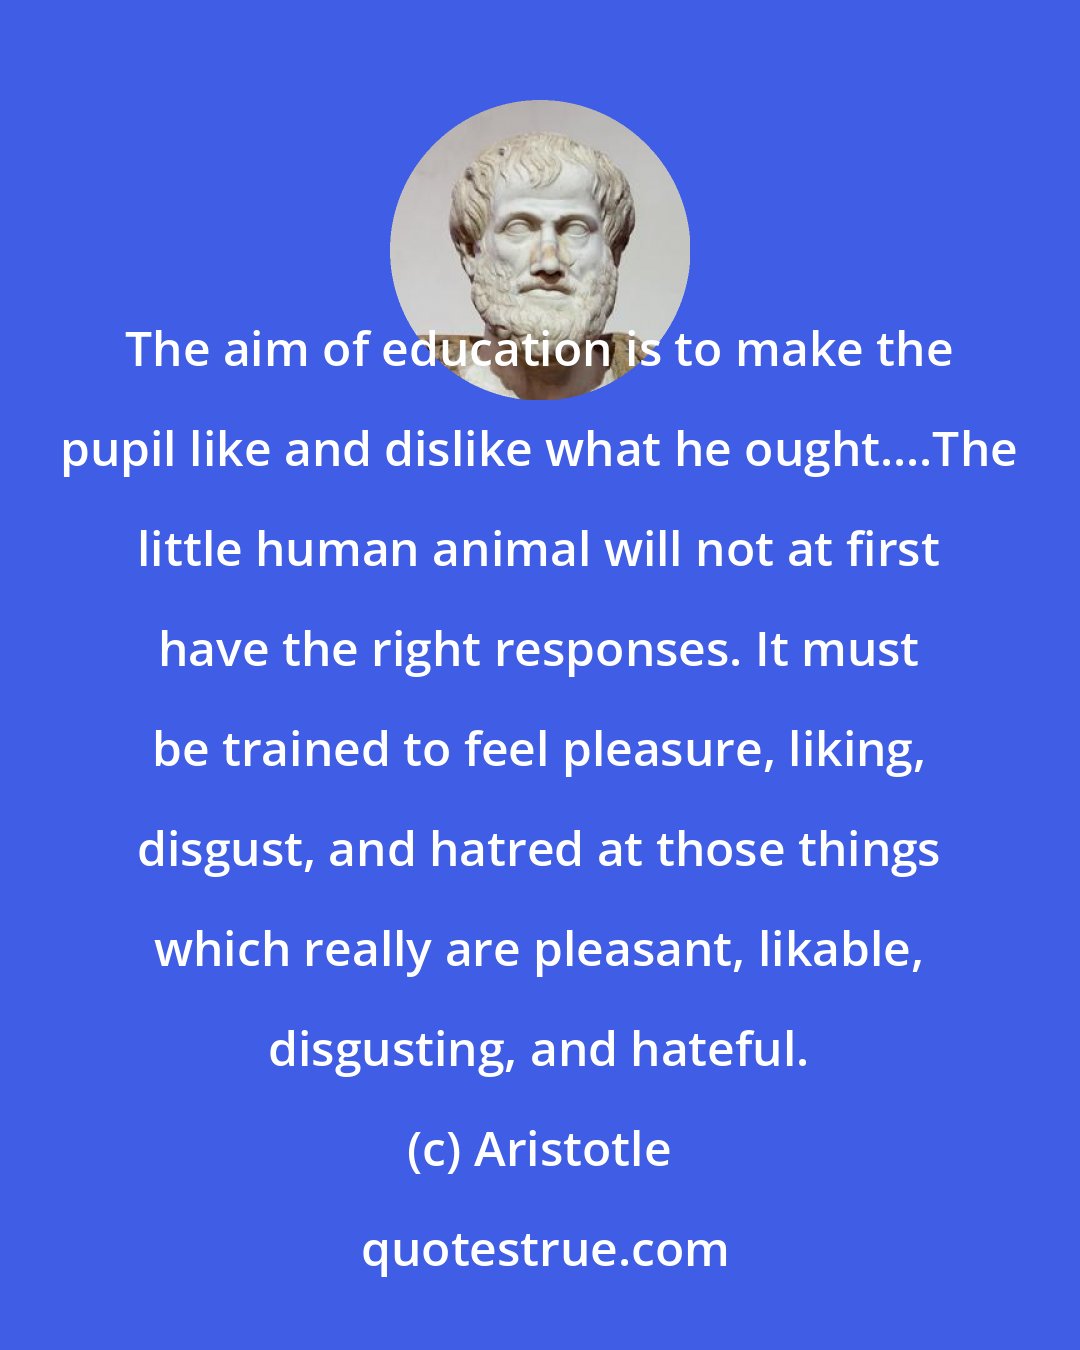 Aristotle: The aim of education is to make the pupil like and dislike what he ought....The little human animal will not at first have the right responses. It must be trained to feel pleasure, liking, disgust, and hatred at those things which really are pleasant, likable, disgusting, and hateful.